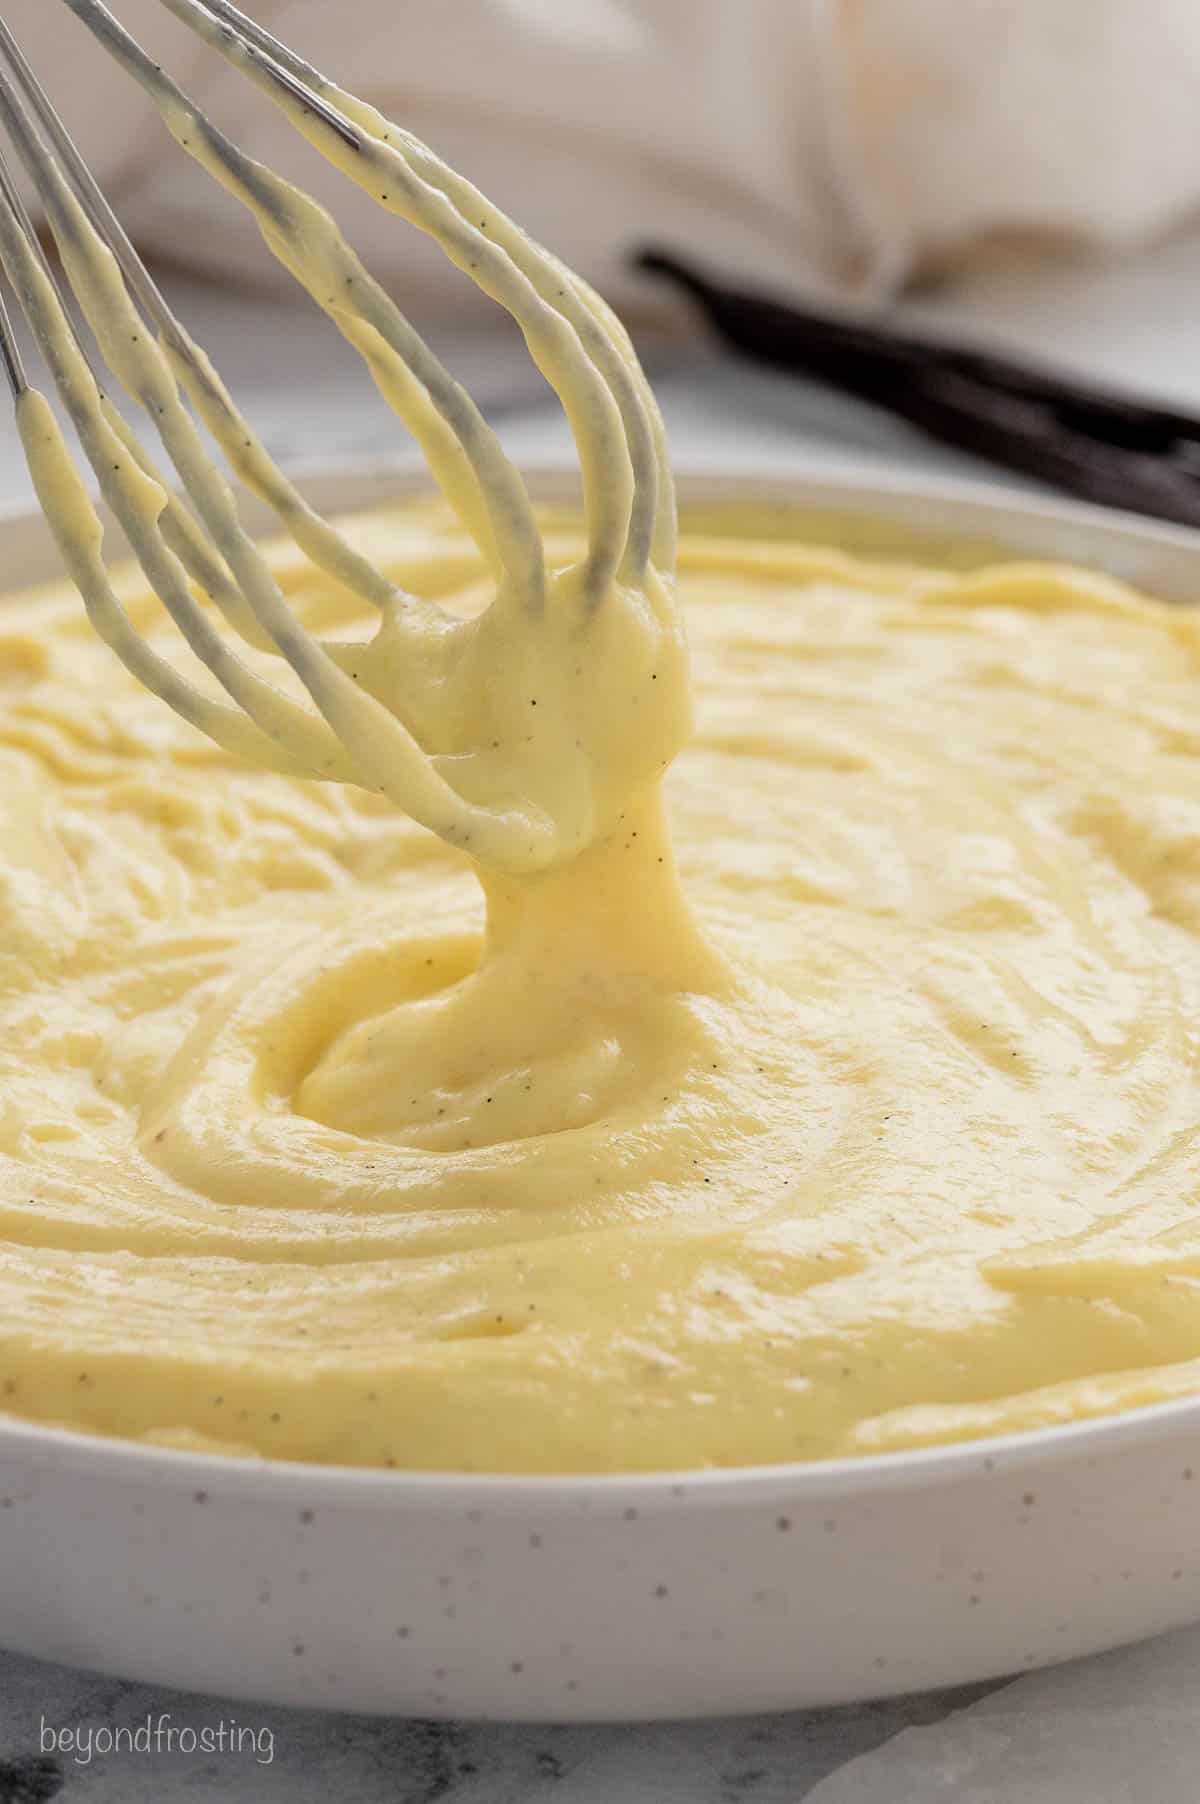 A whisk dipped into a large bowl of pastry cream.